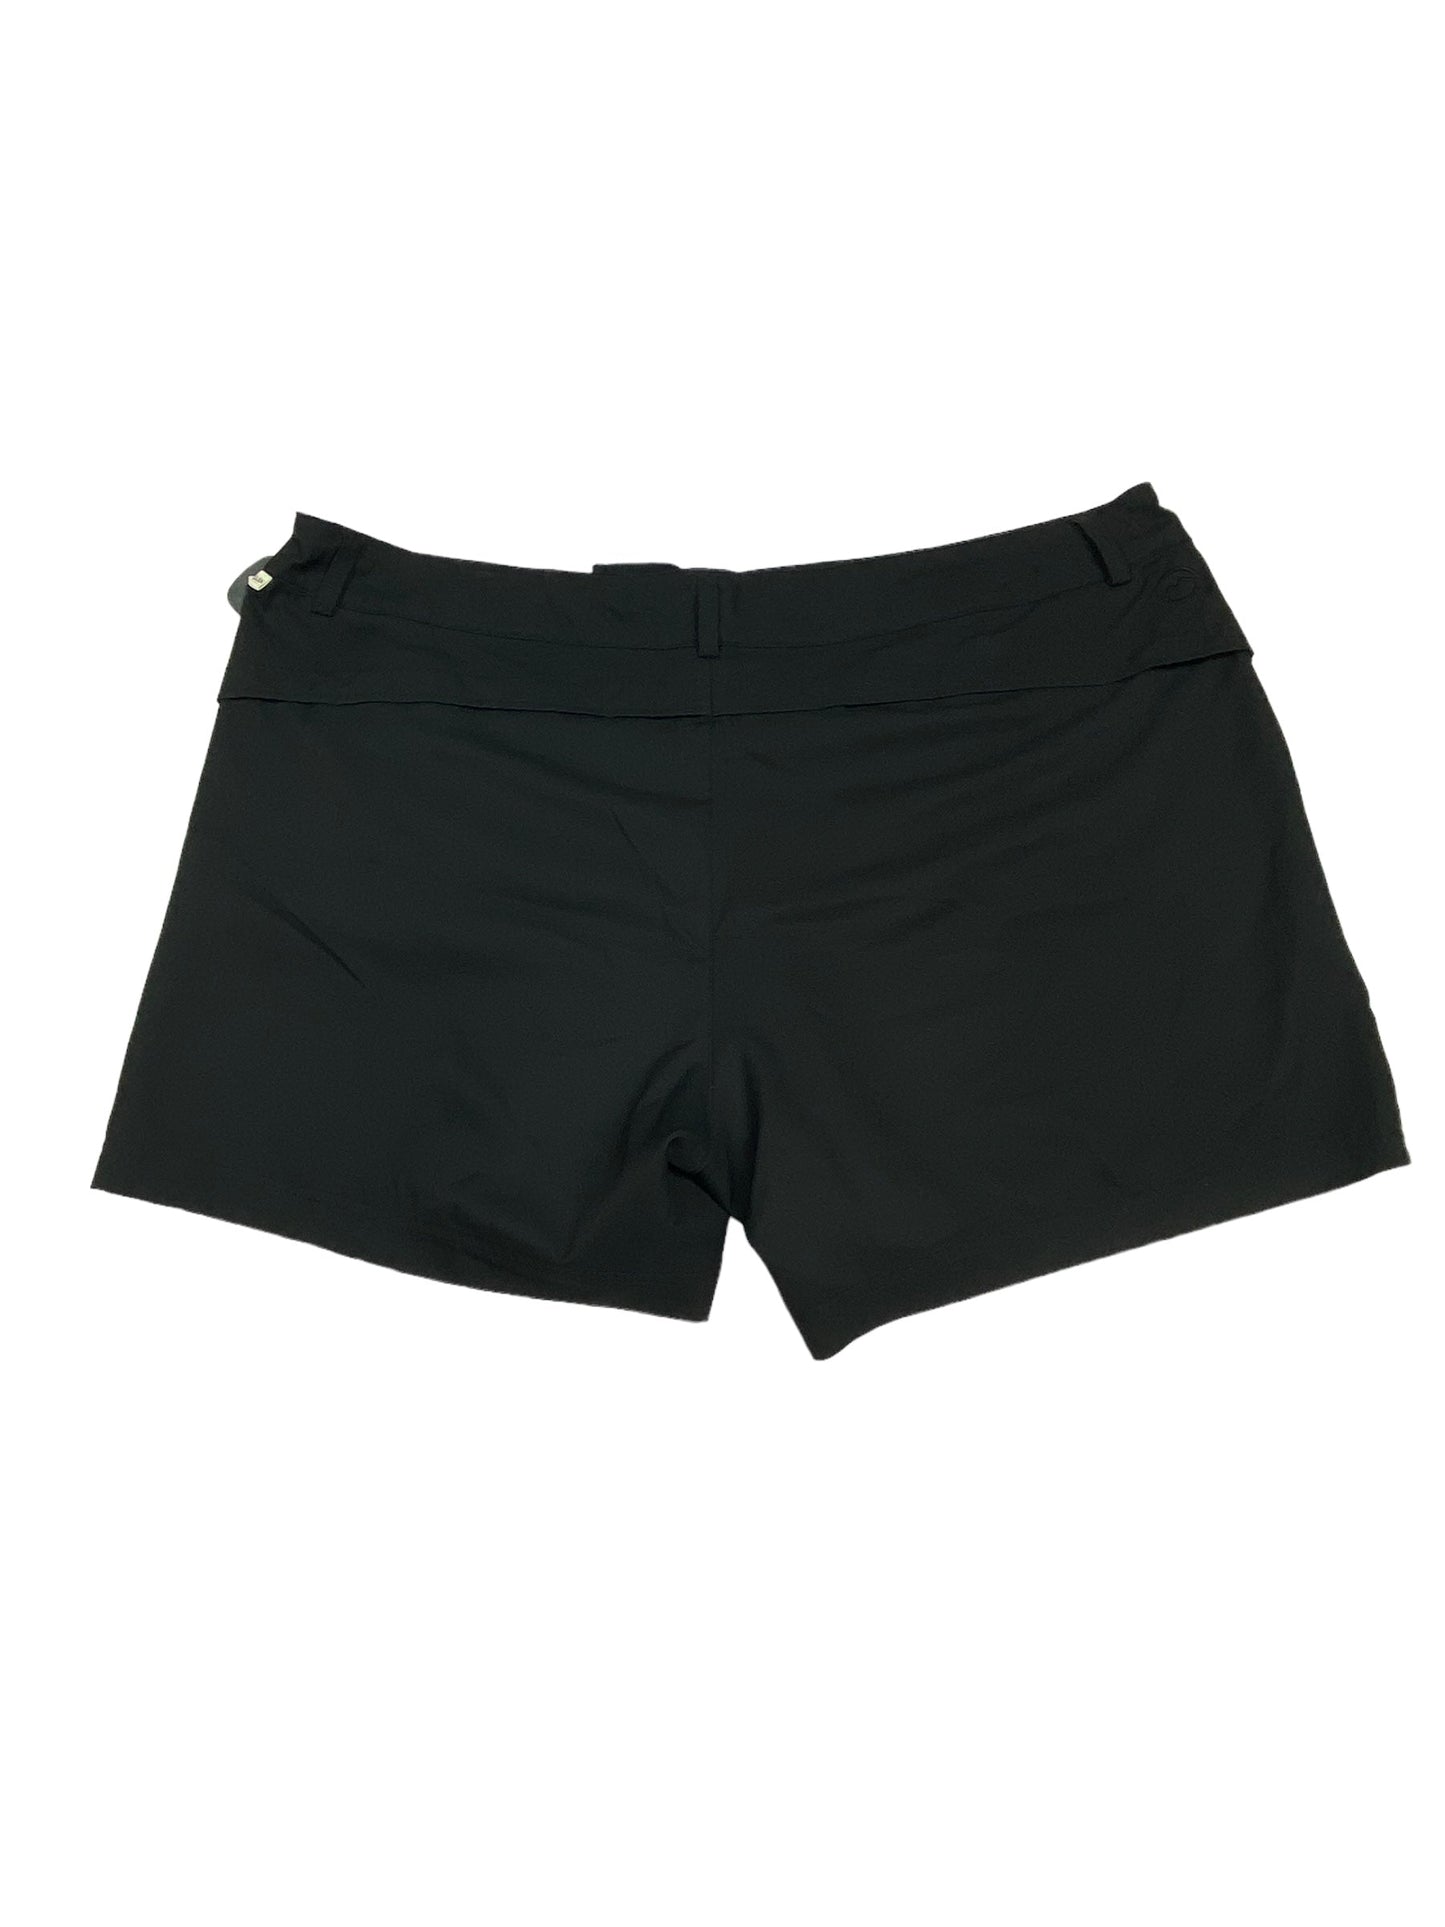 Athletic Shorts By Magellan  Size: 2x